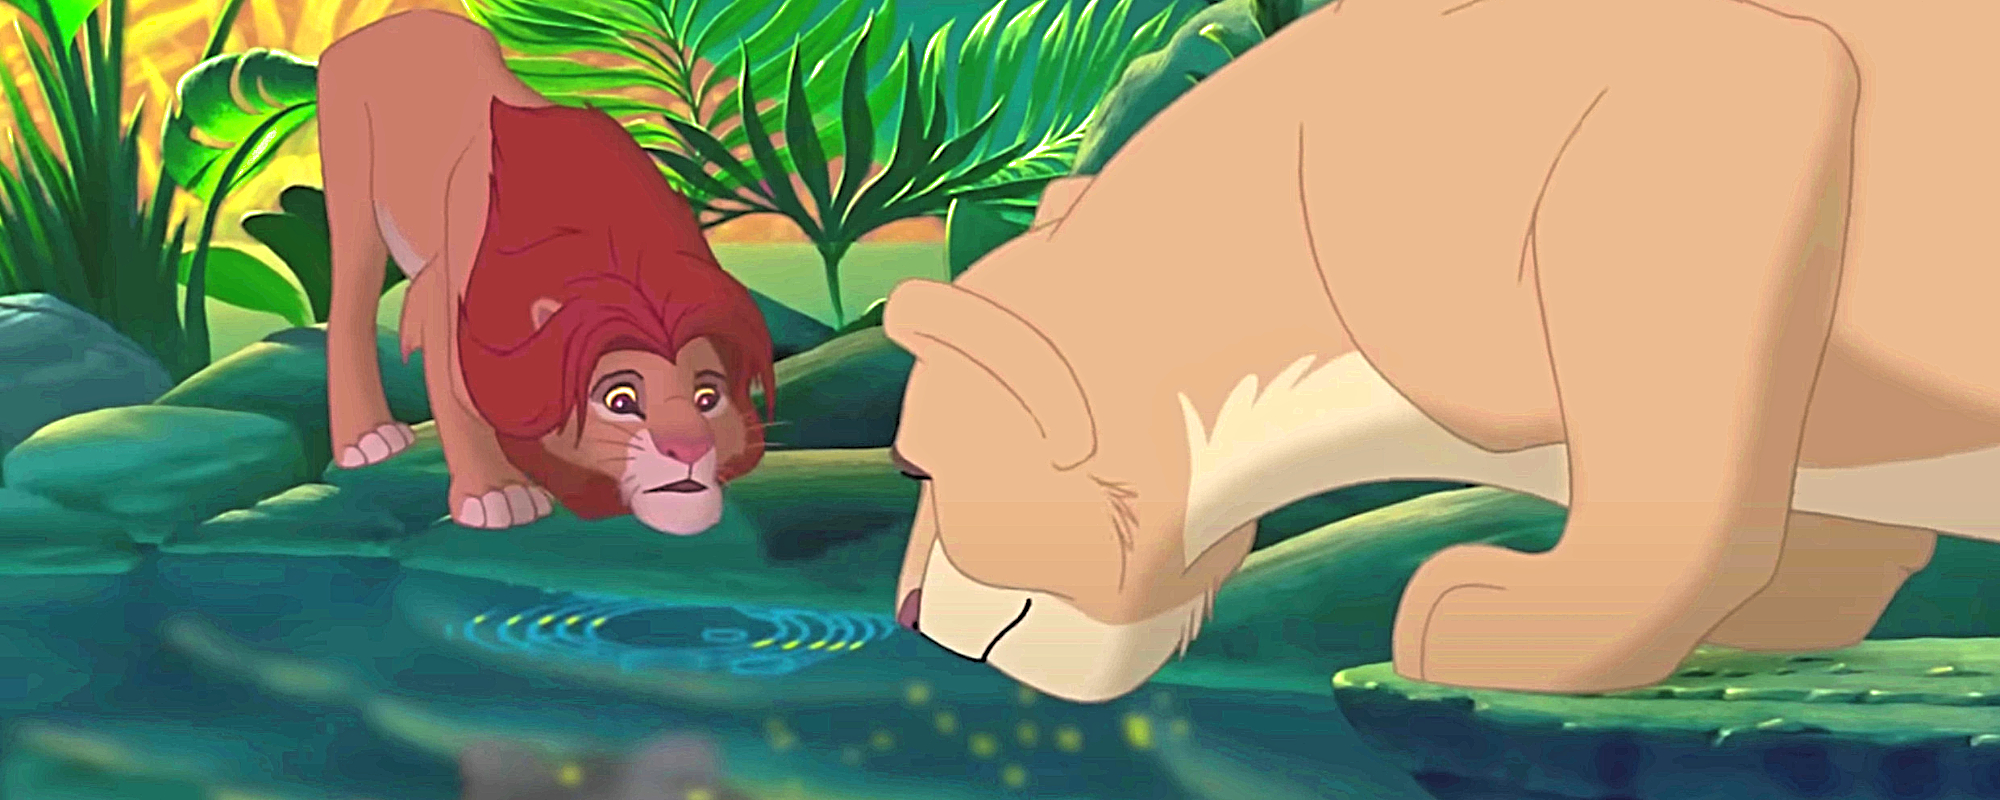 Are These Really the 5 Best Songs from Animated Films Ever?